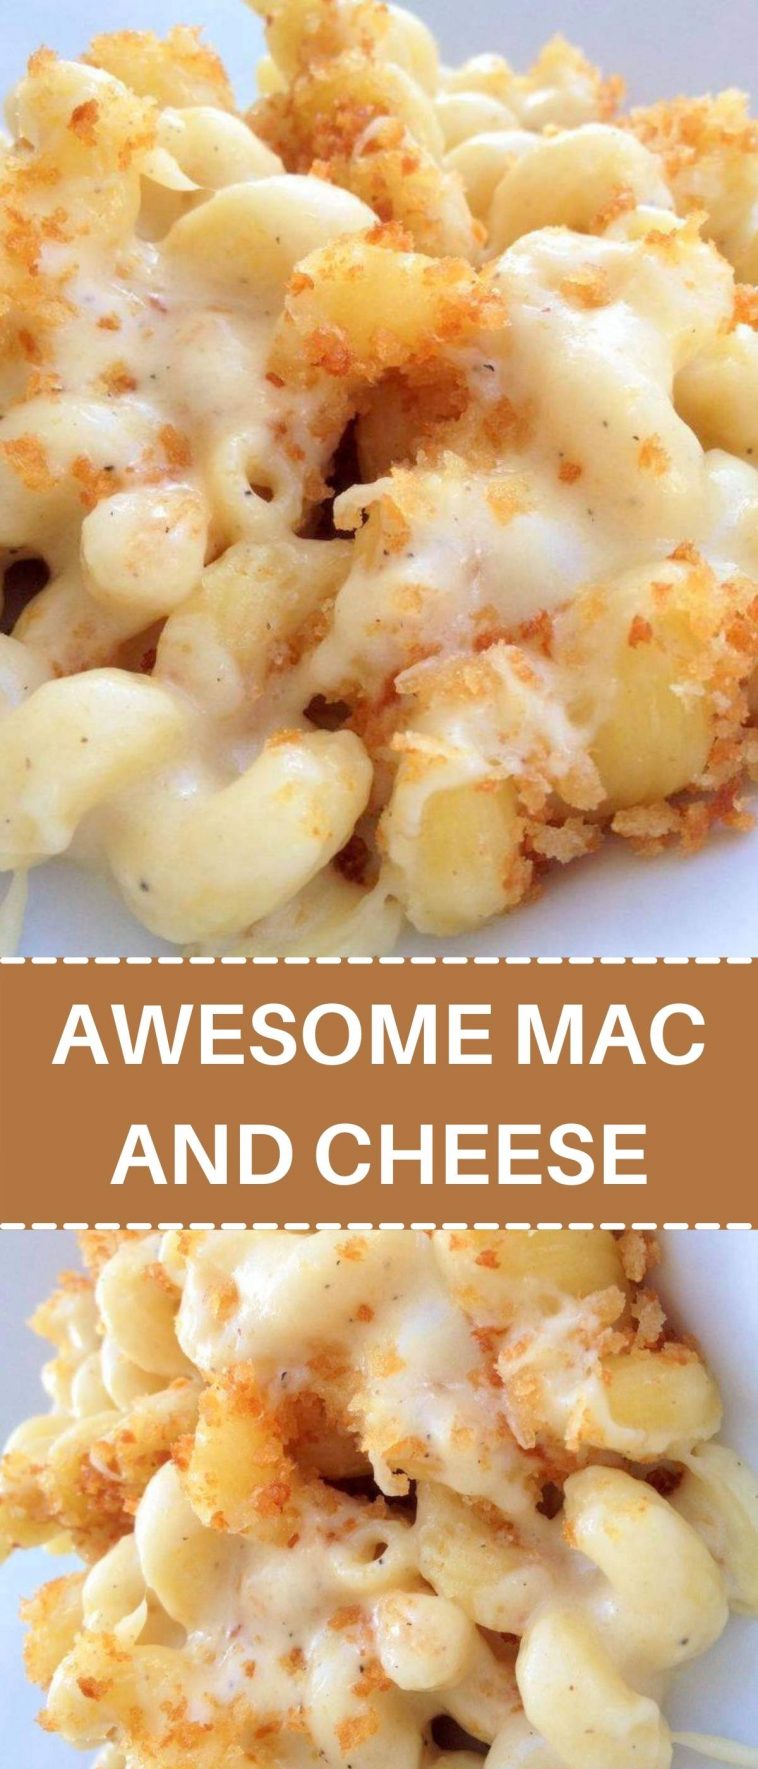 AWESOME MAC AND CHEESE